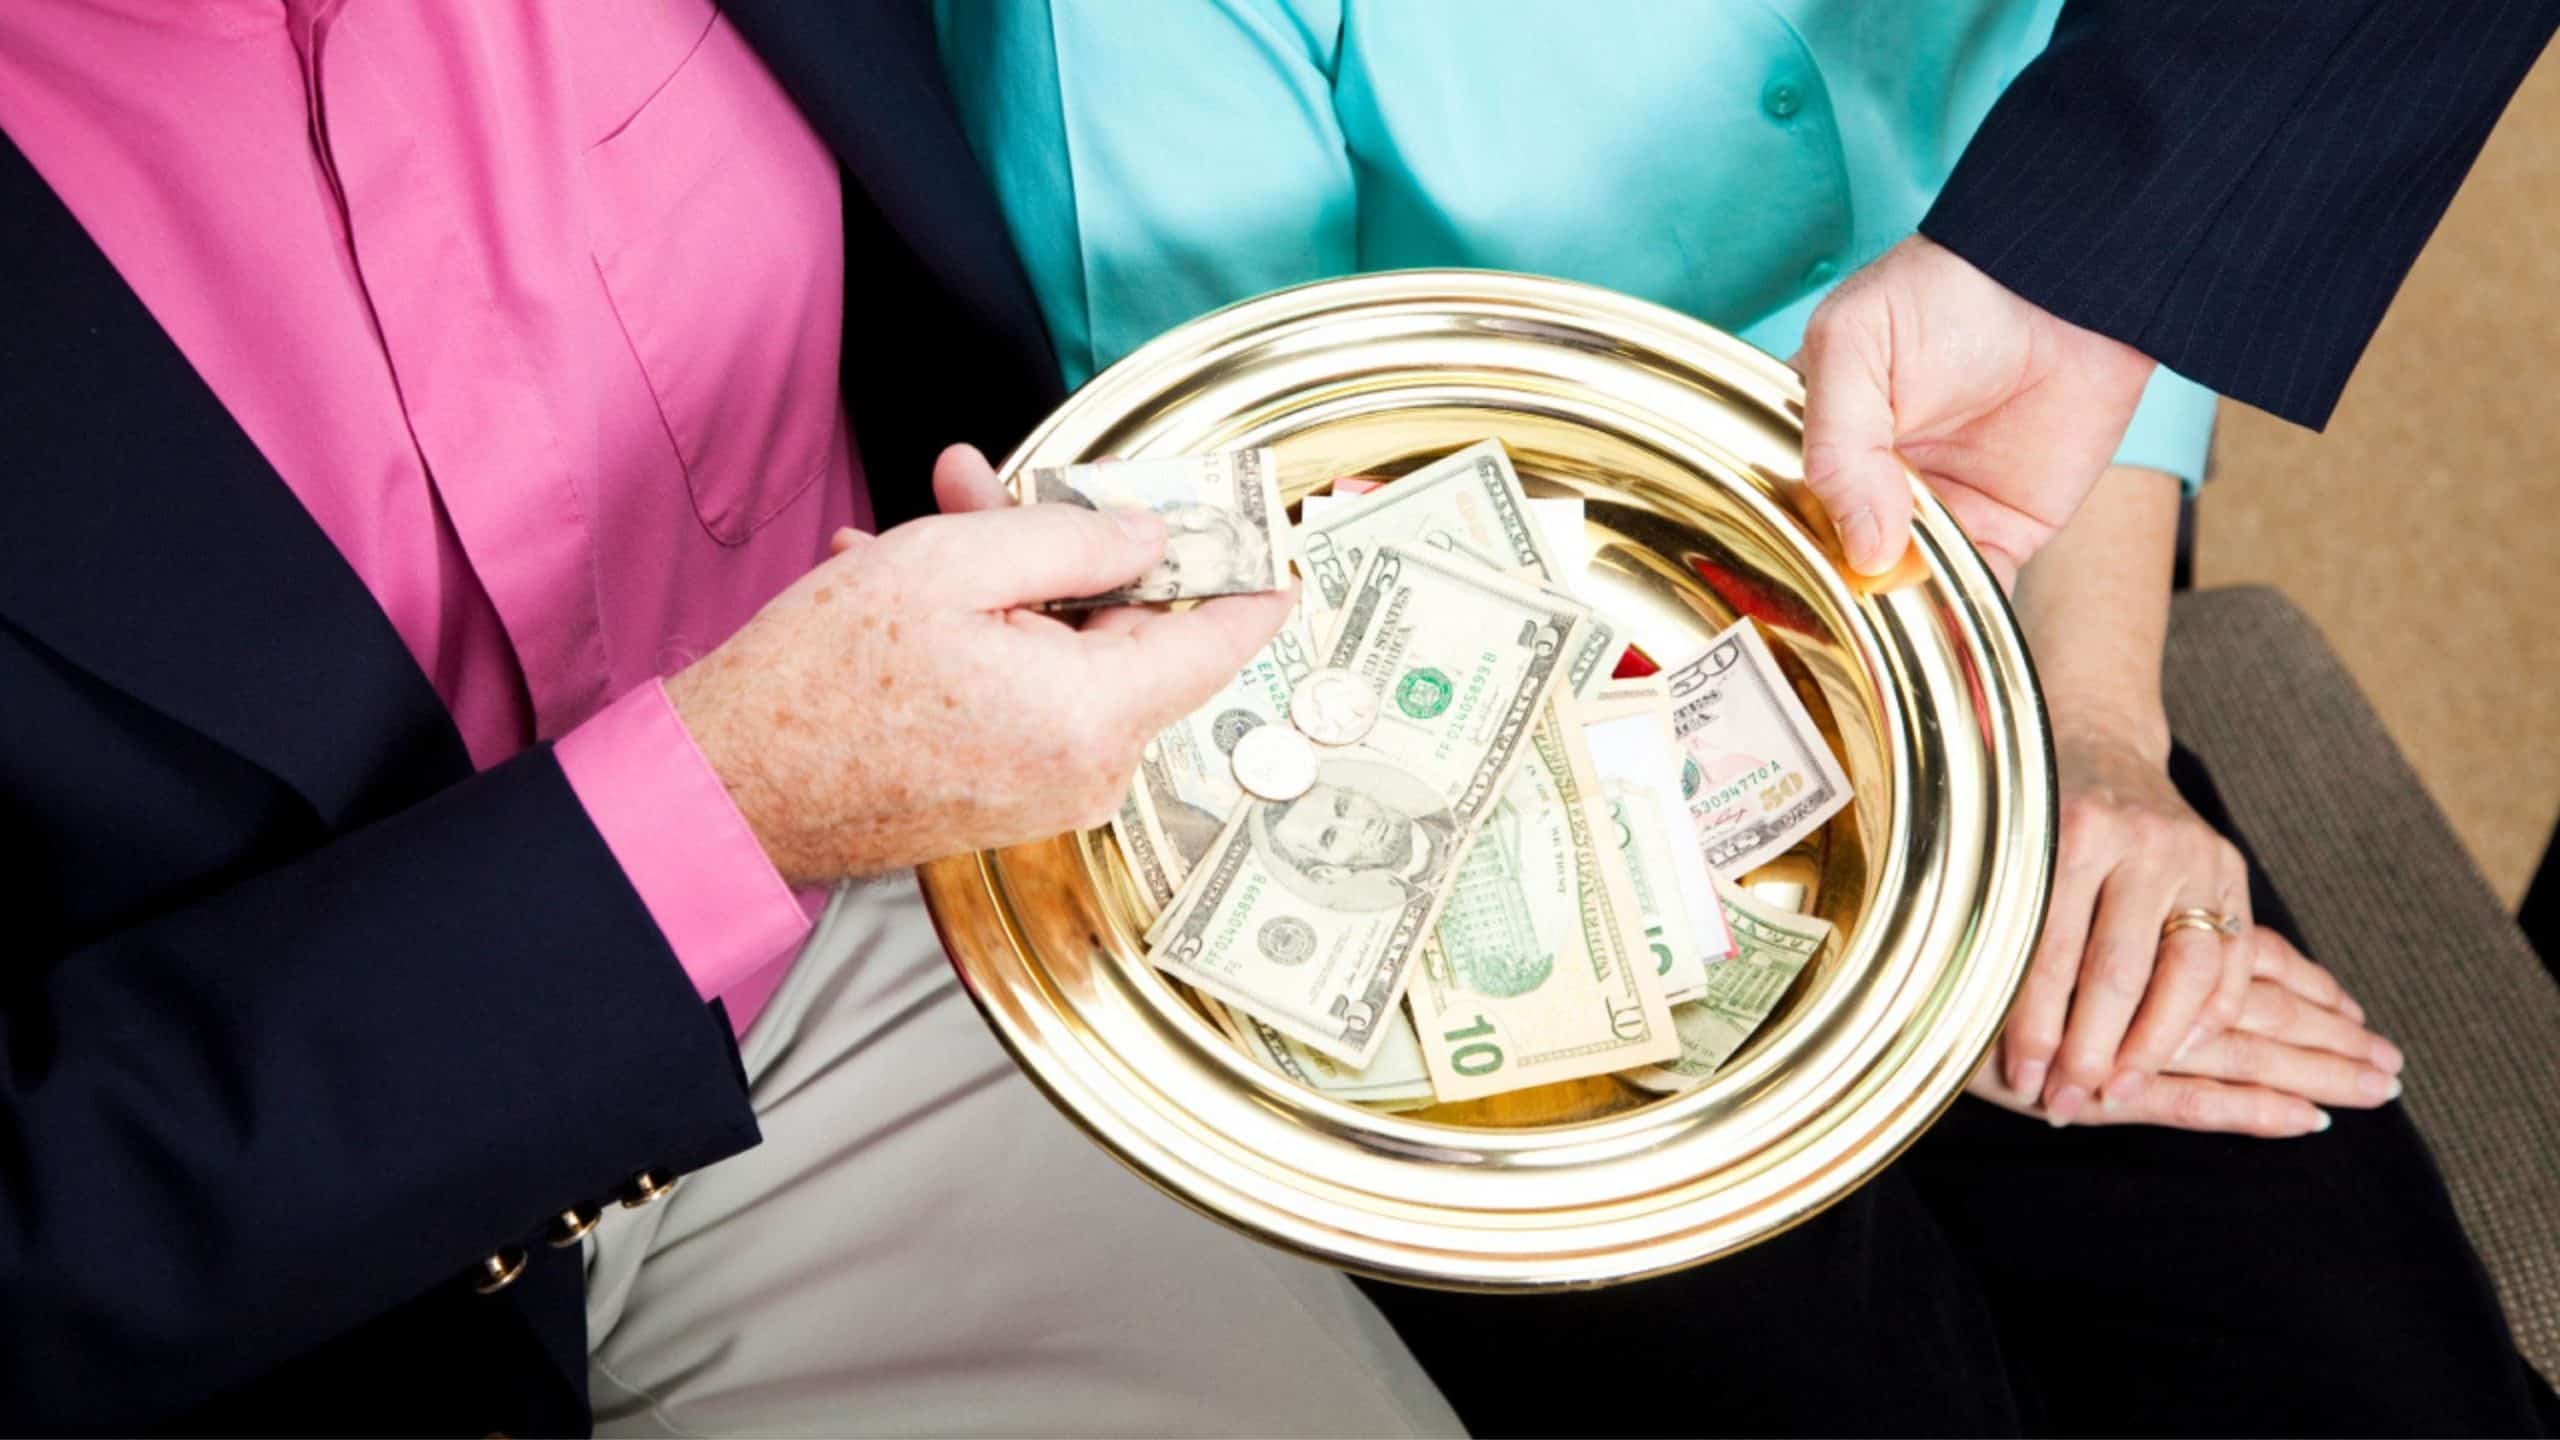 Couple at church giving charitable contributions in the collection plate